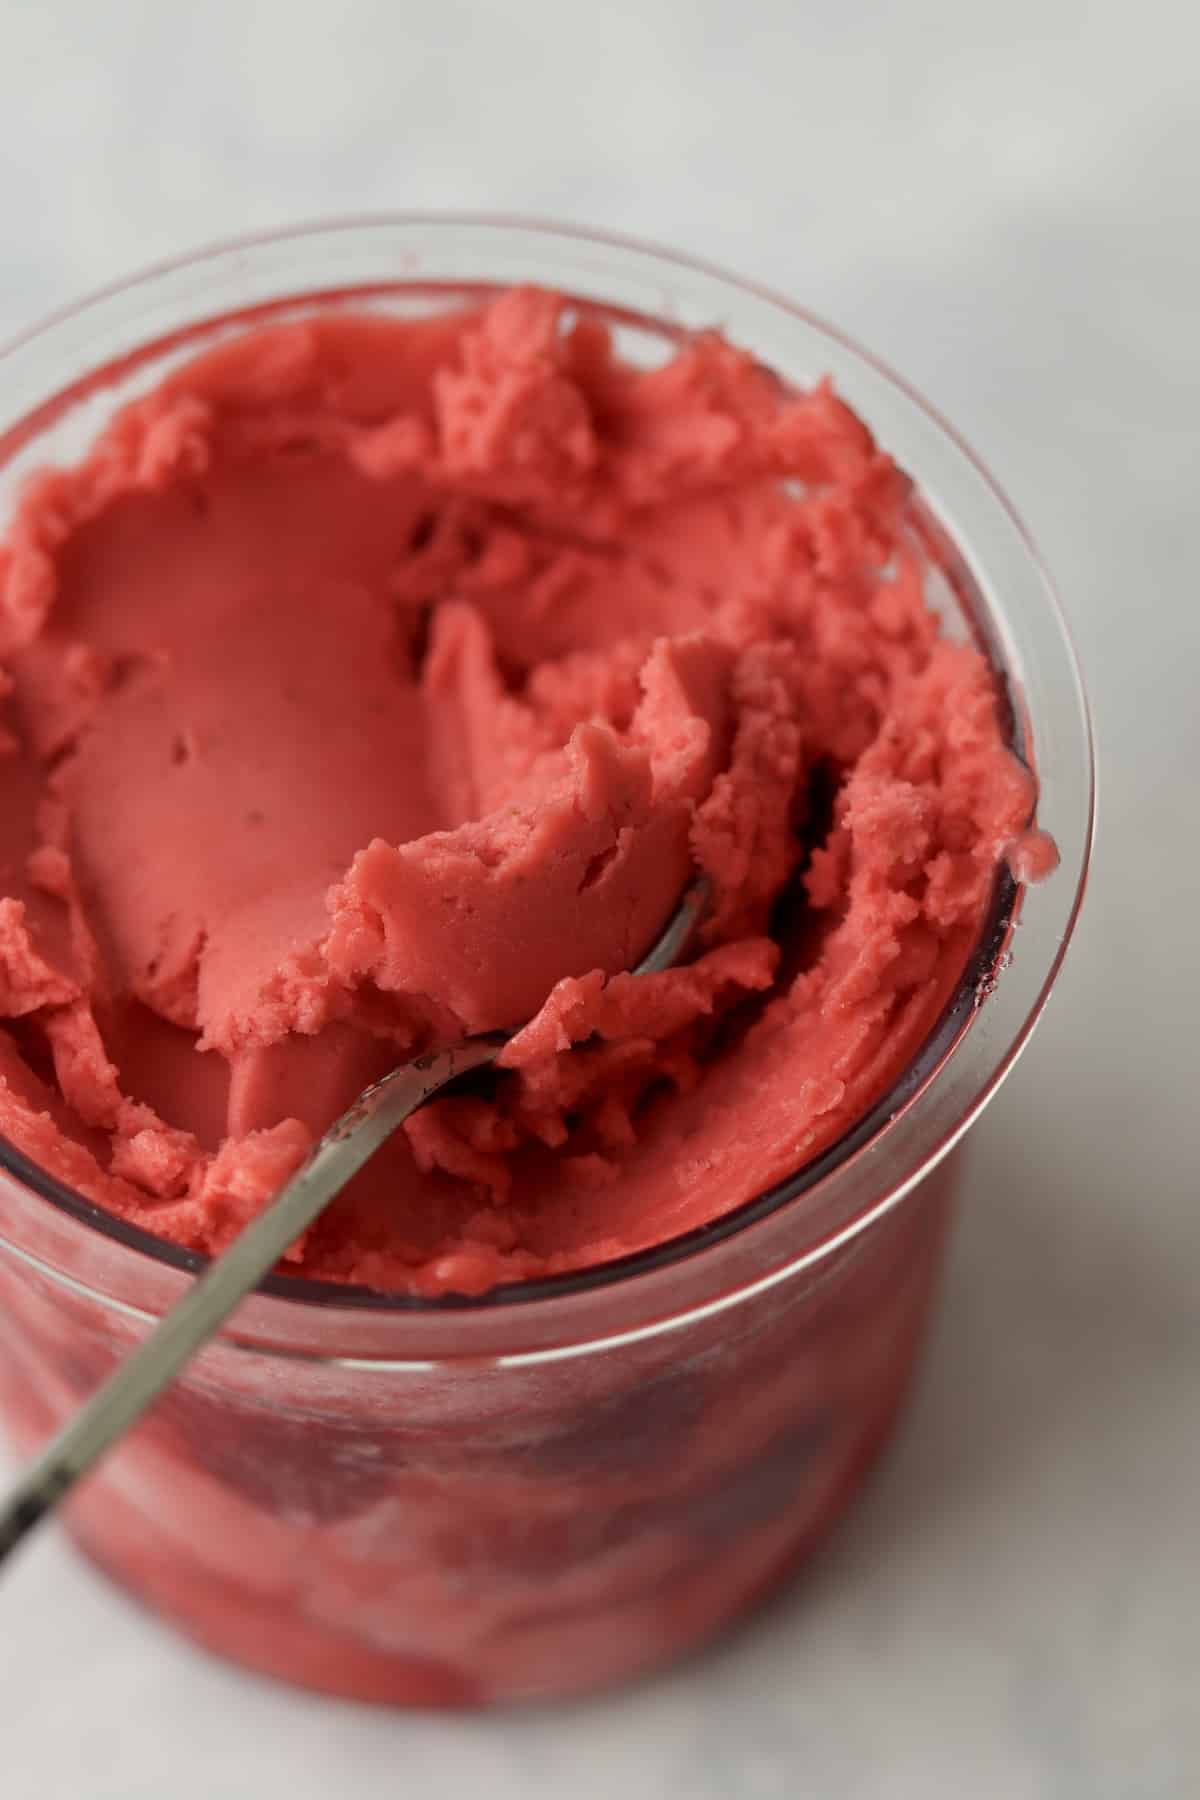 Creamy Ninja Creami strawberry sorbet in pint container with a spoon.